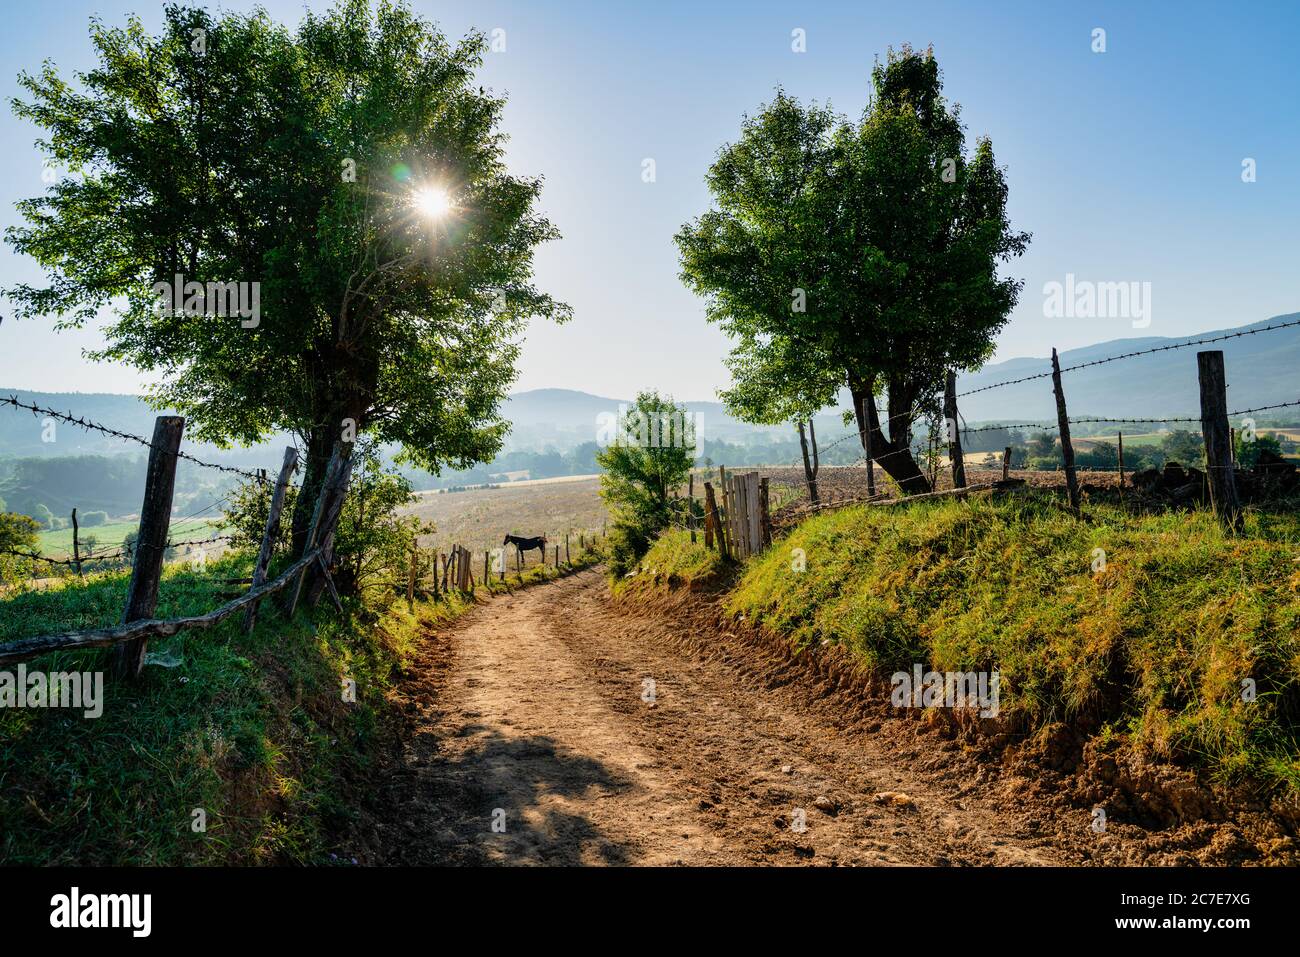 The road goes to the hills among trees and fields under in the morning. Daday, Kastamonu, Turkey Stock Photo